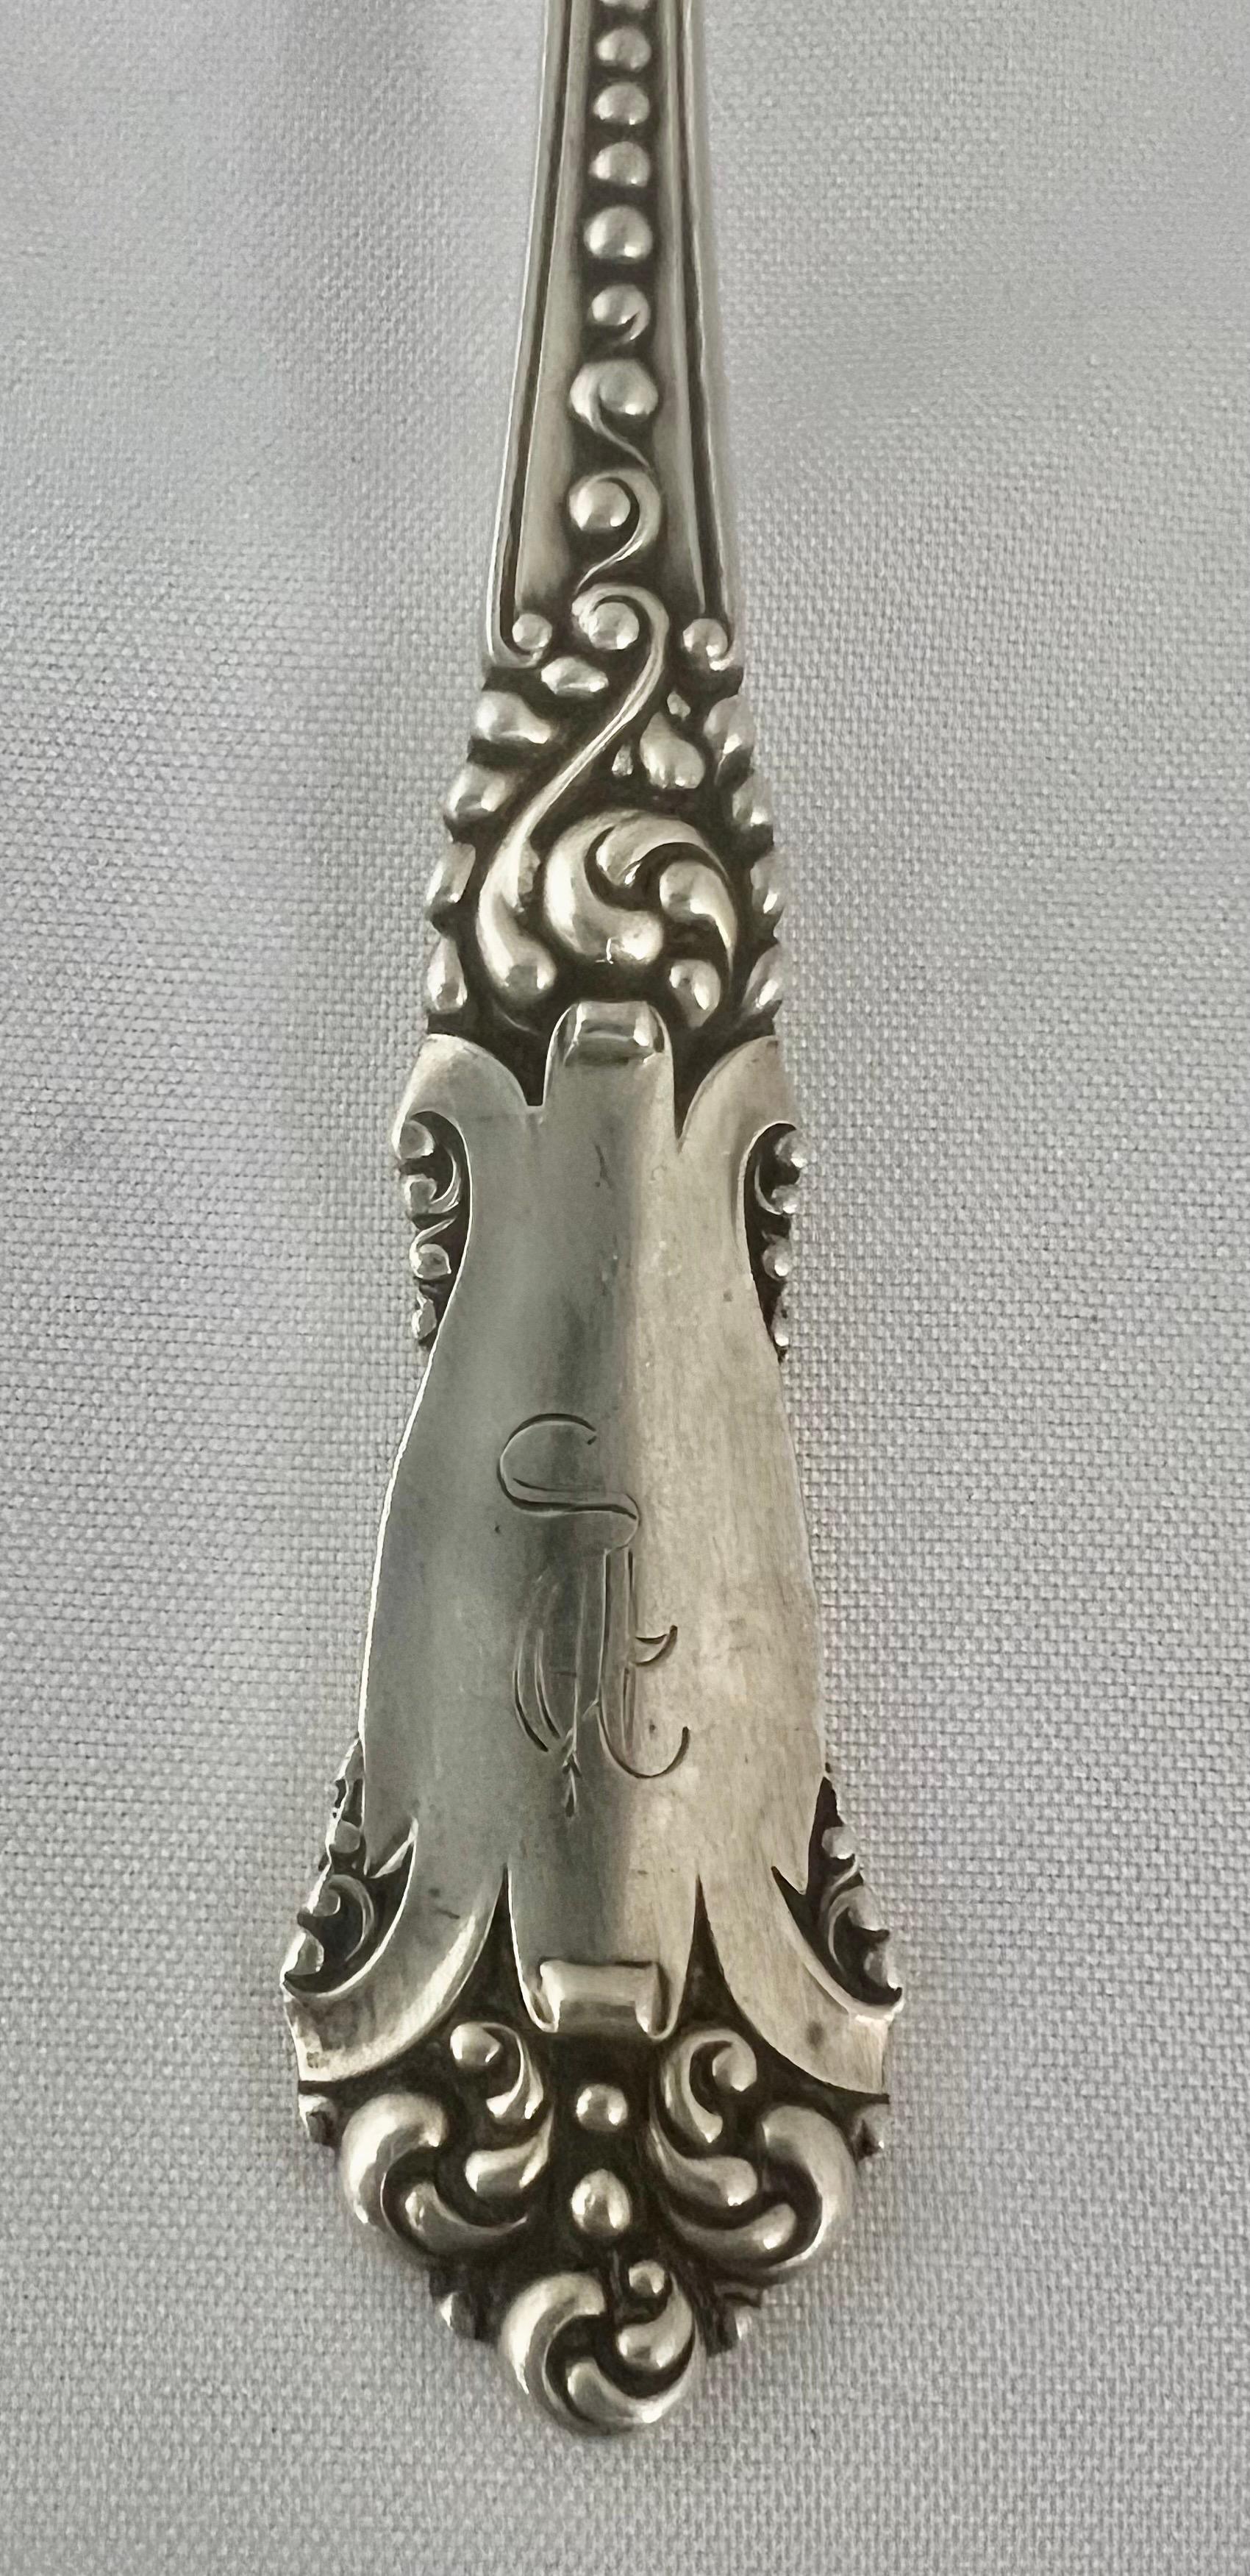 The English sterling silver spoon has a lion hallmark depicting London and an 